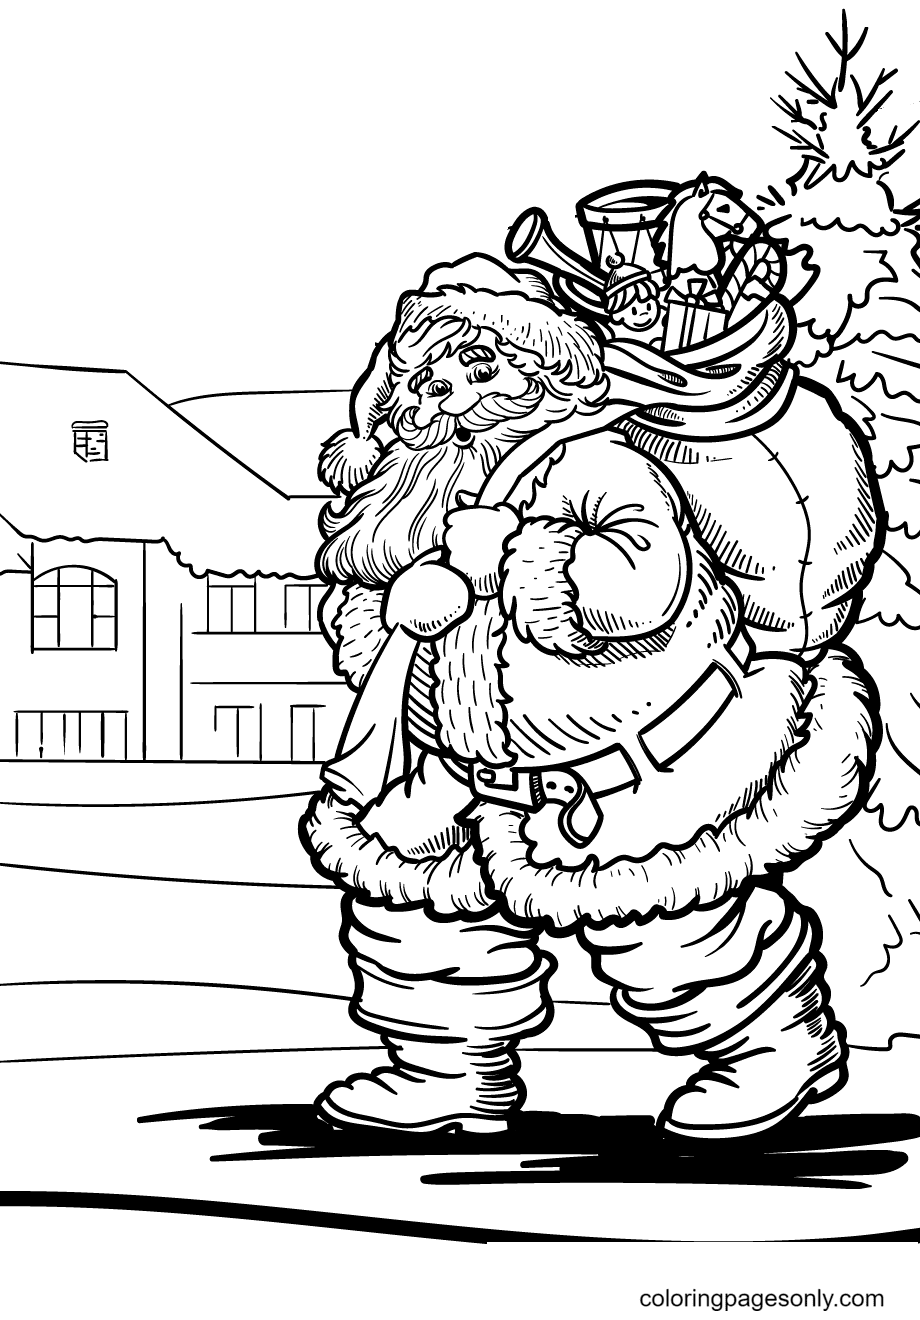 Santa Claus With a Magic Gift Bag Coloring Pages